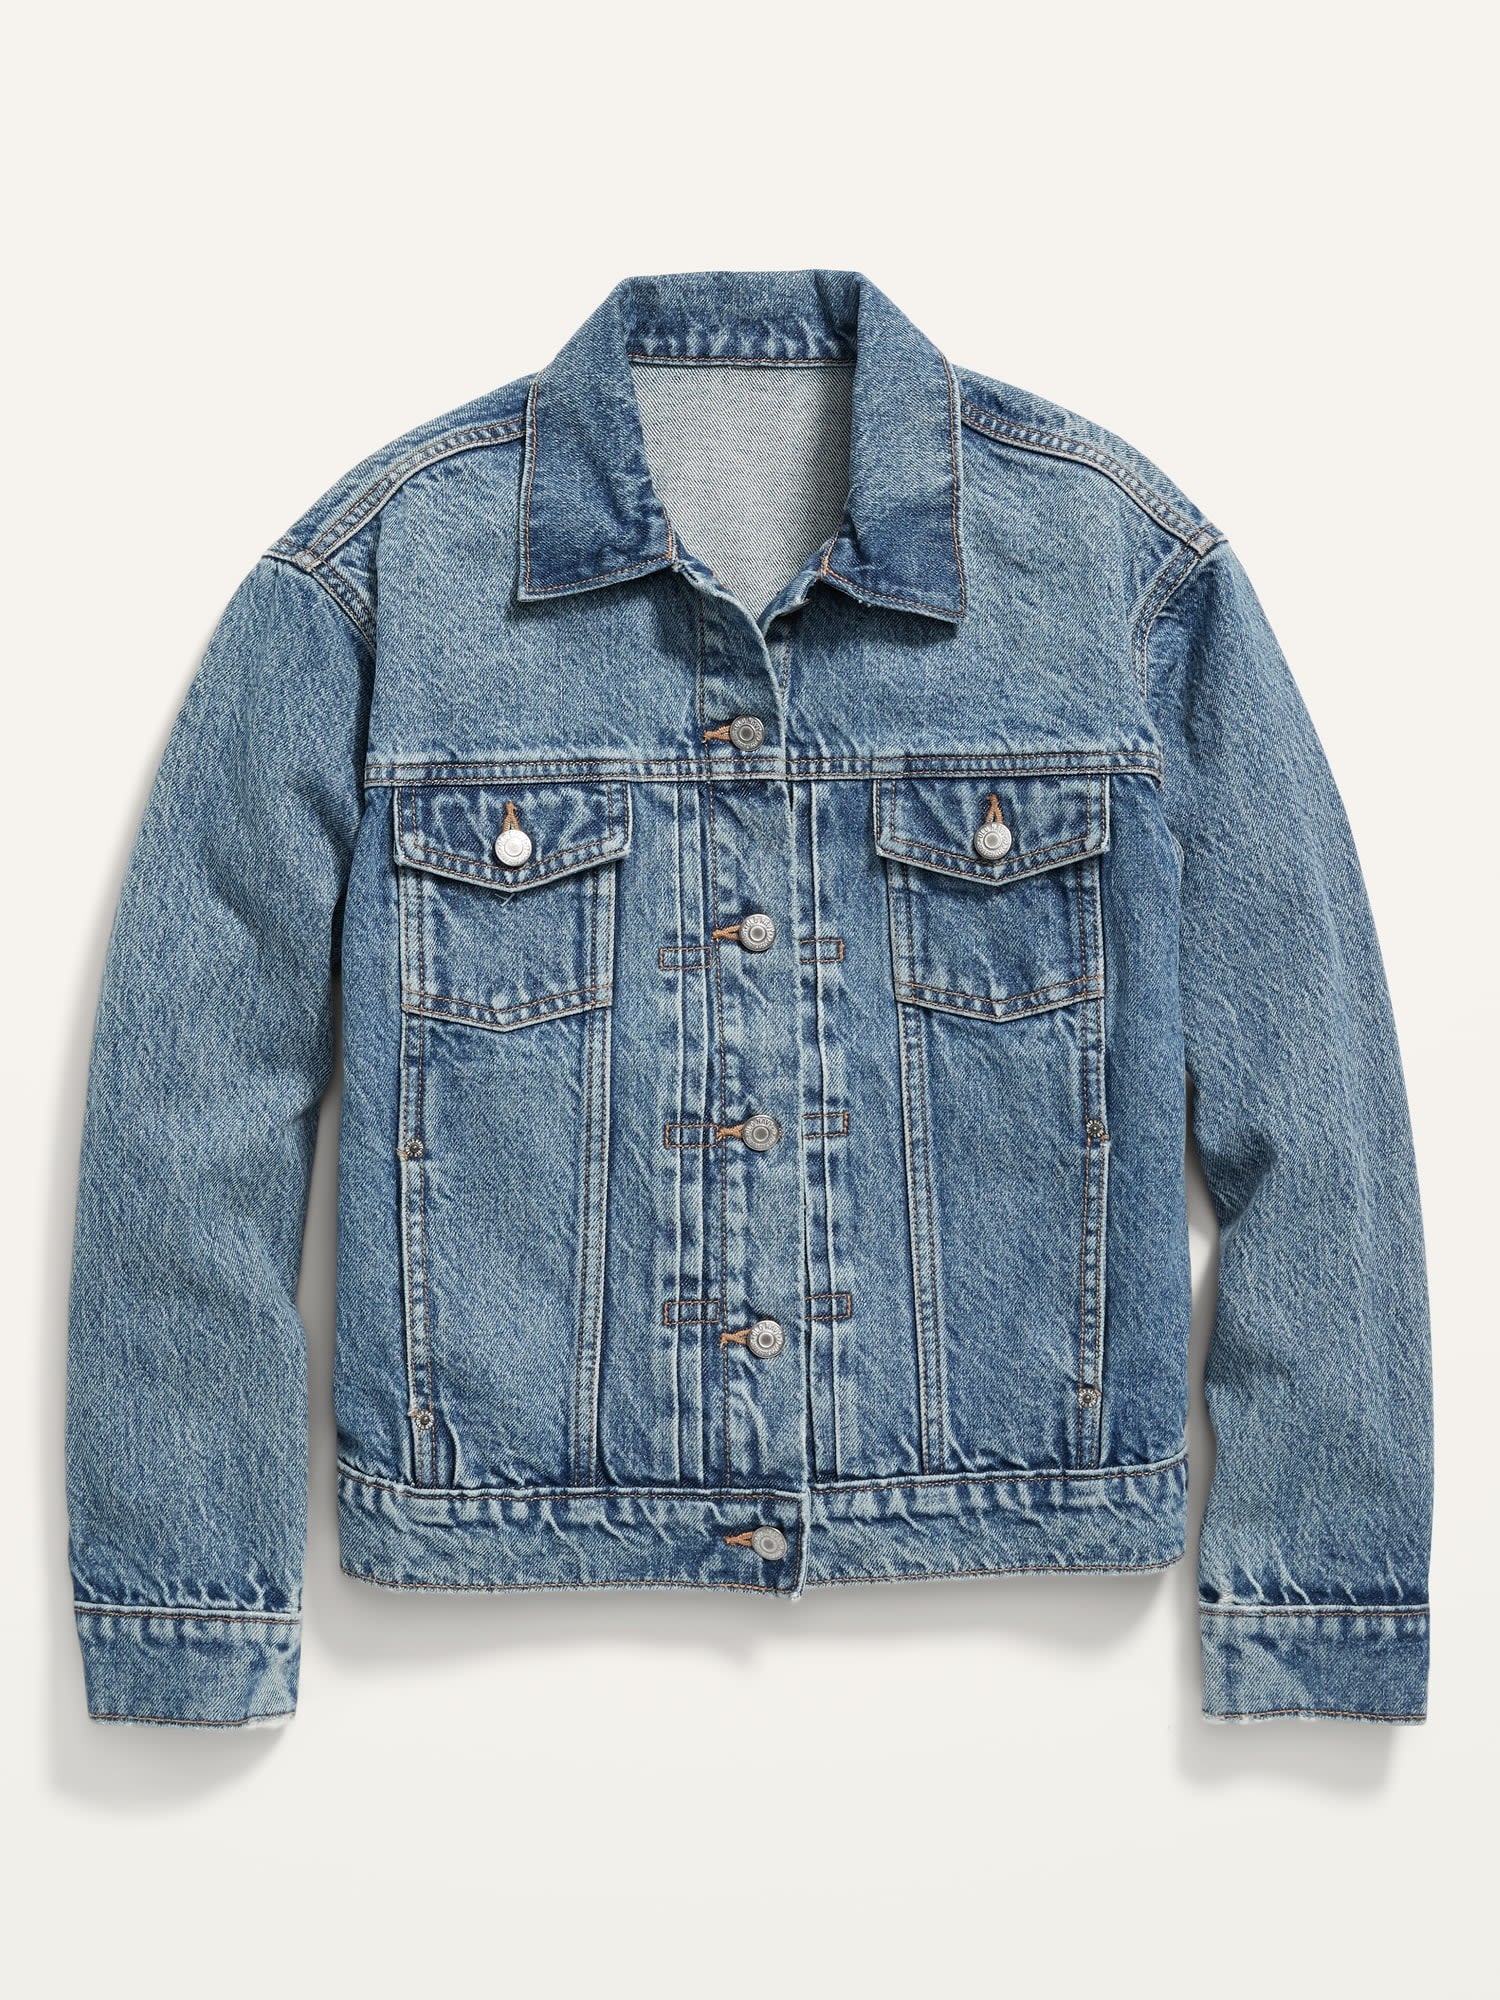 Can You Be Too Old for a Jean Jacket? - The New York Times